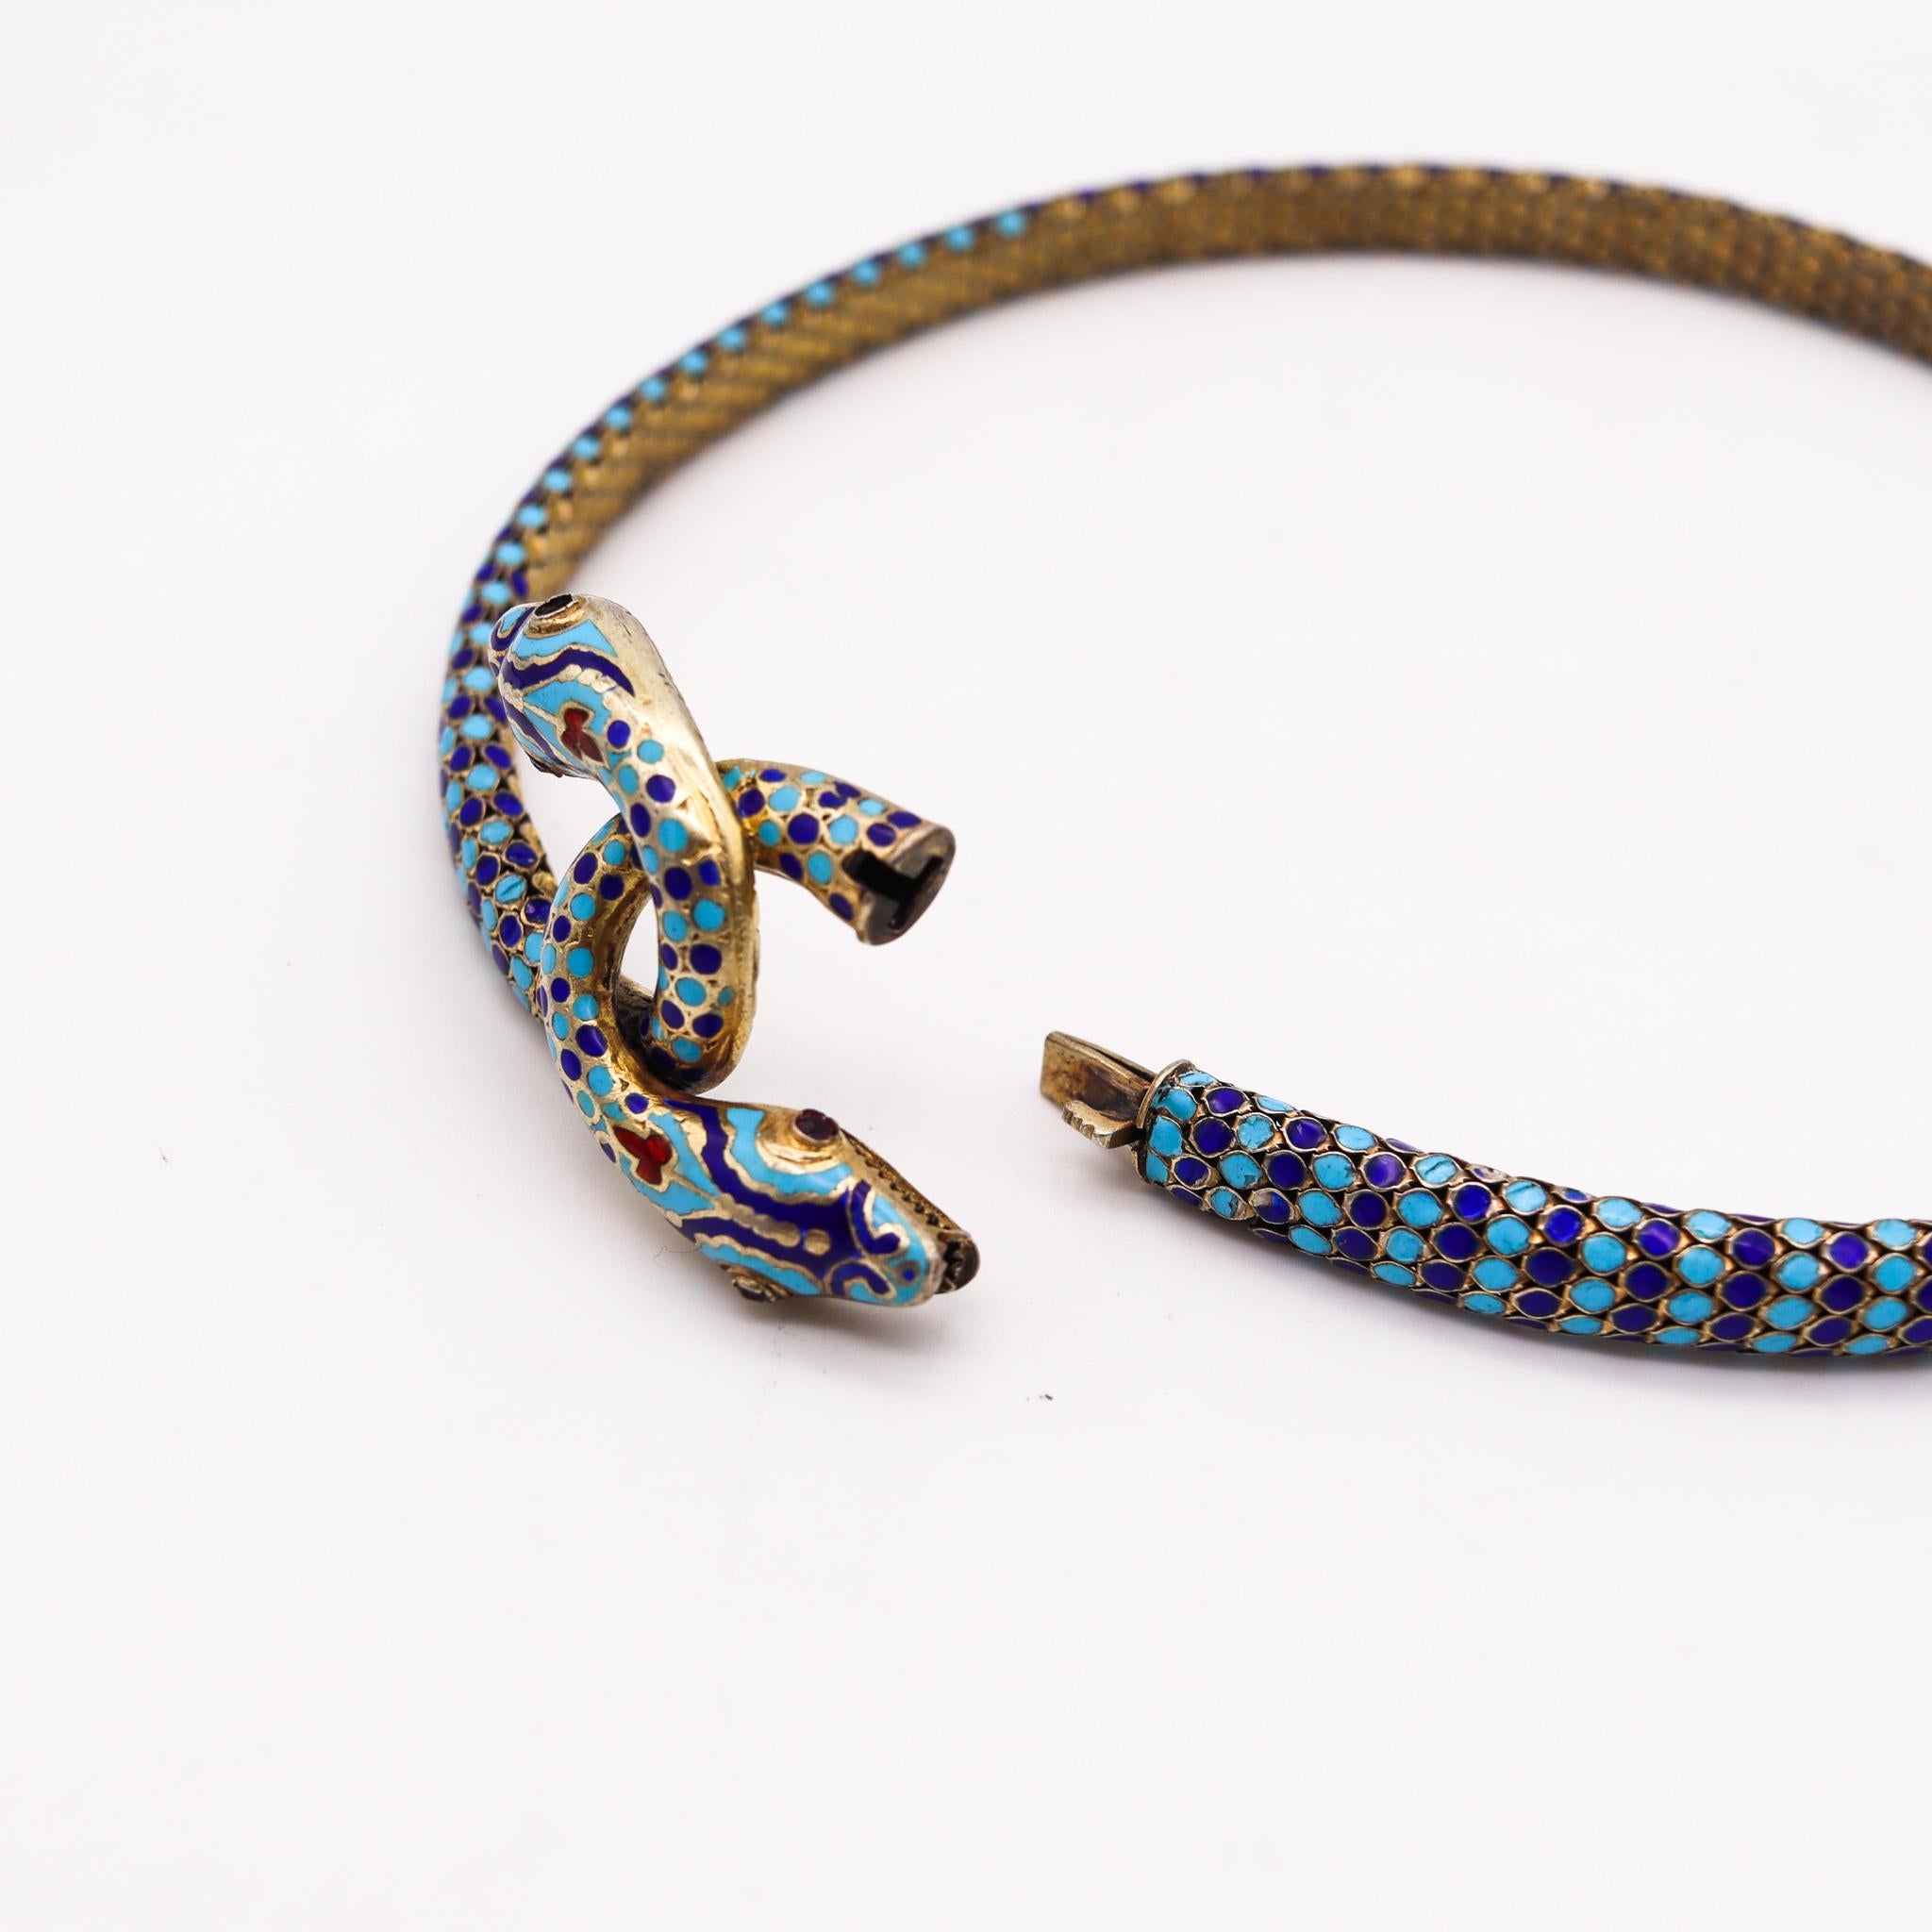 French 1880 Egyptian Revival Snakes Necklace in Silver with Champleve Cloisonné For Sale 2